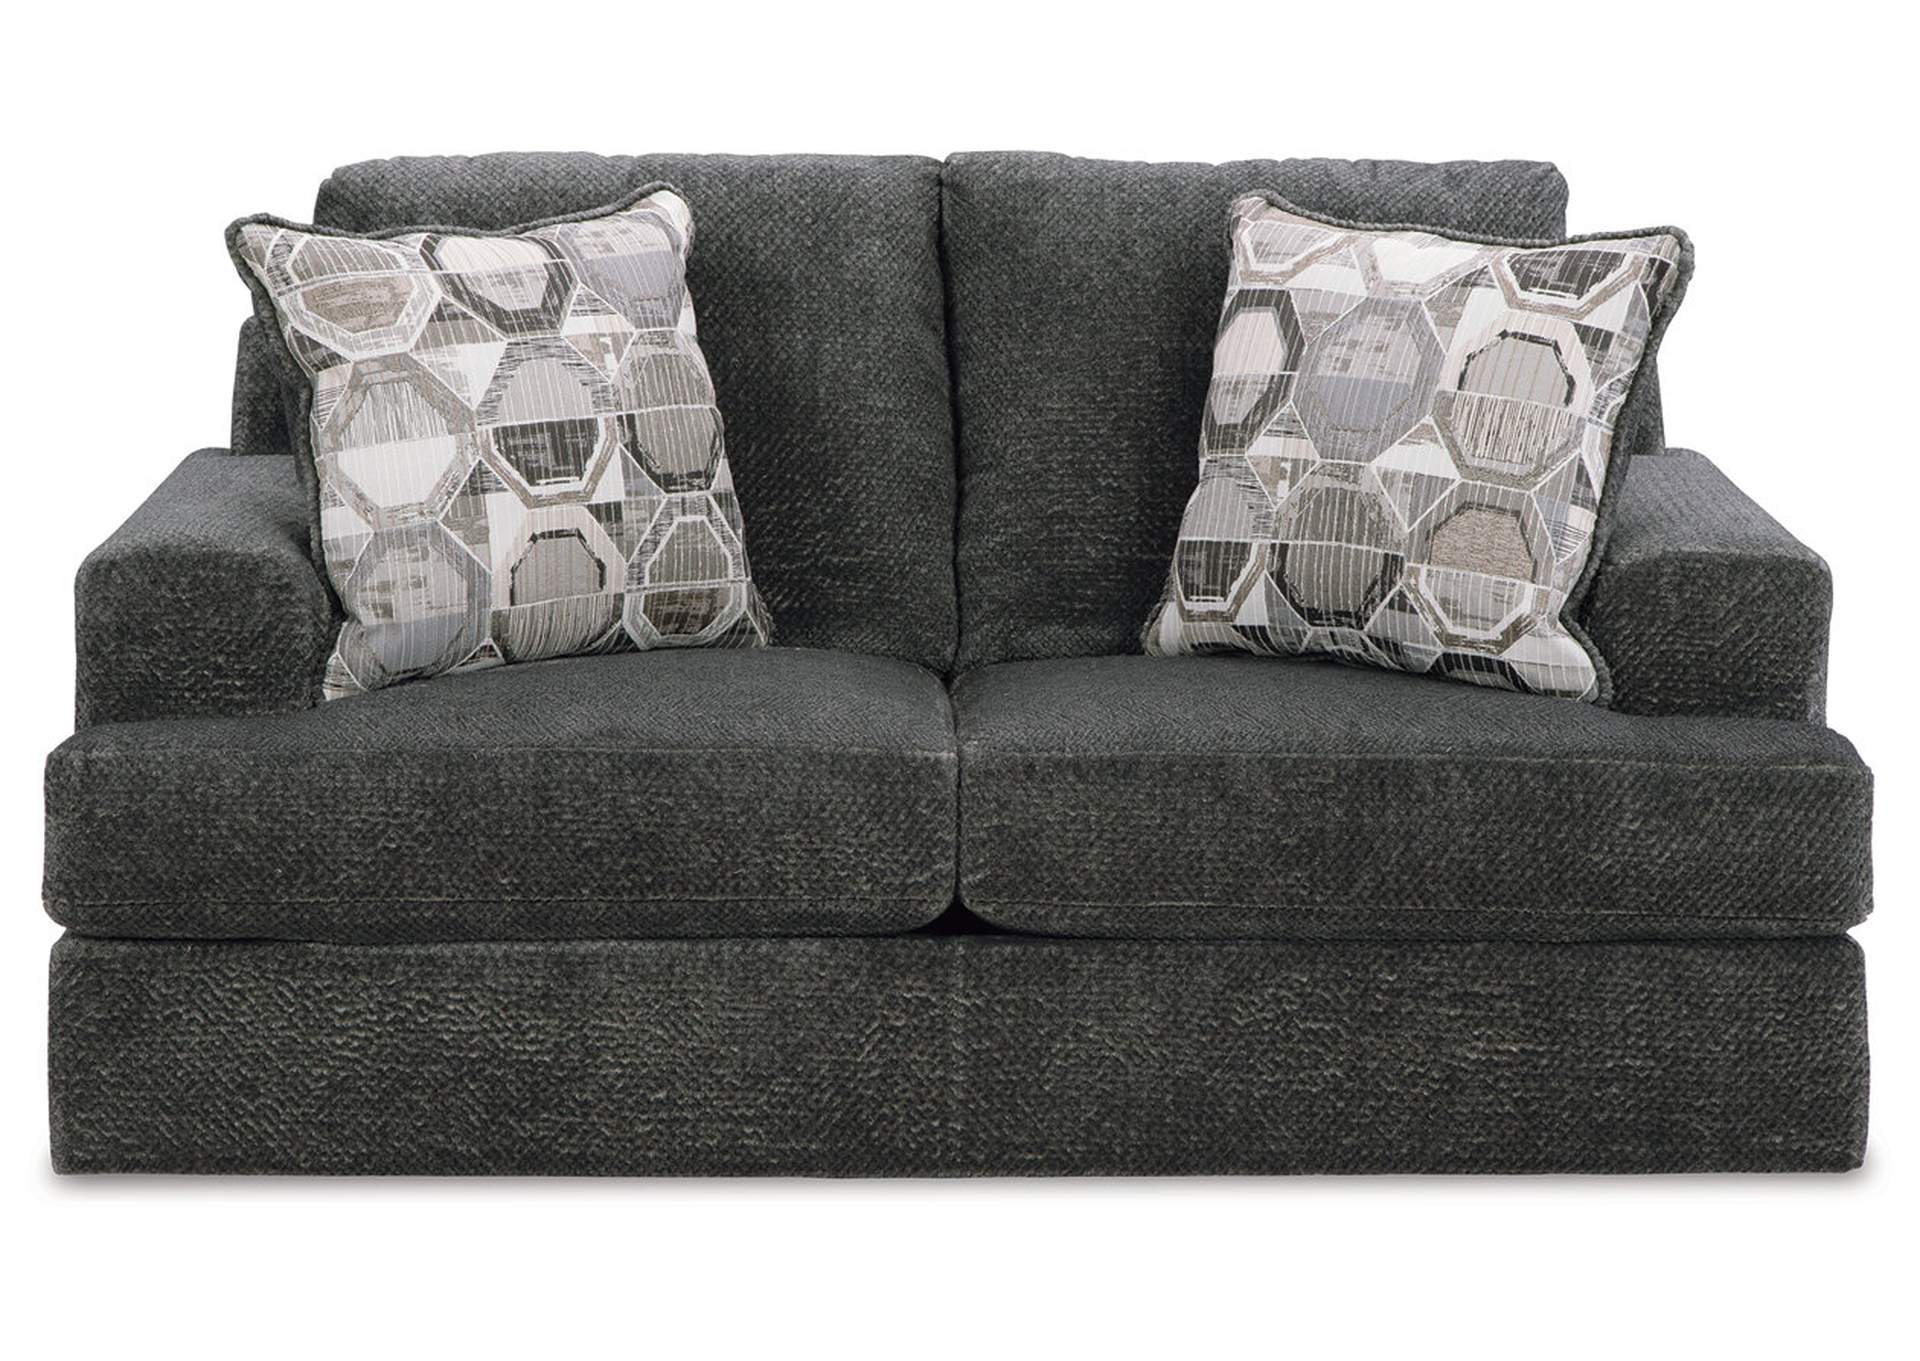 Karinne Sofa and Loveseat,Signature Design By Ashley